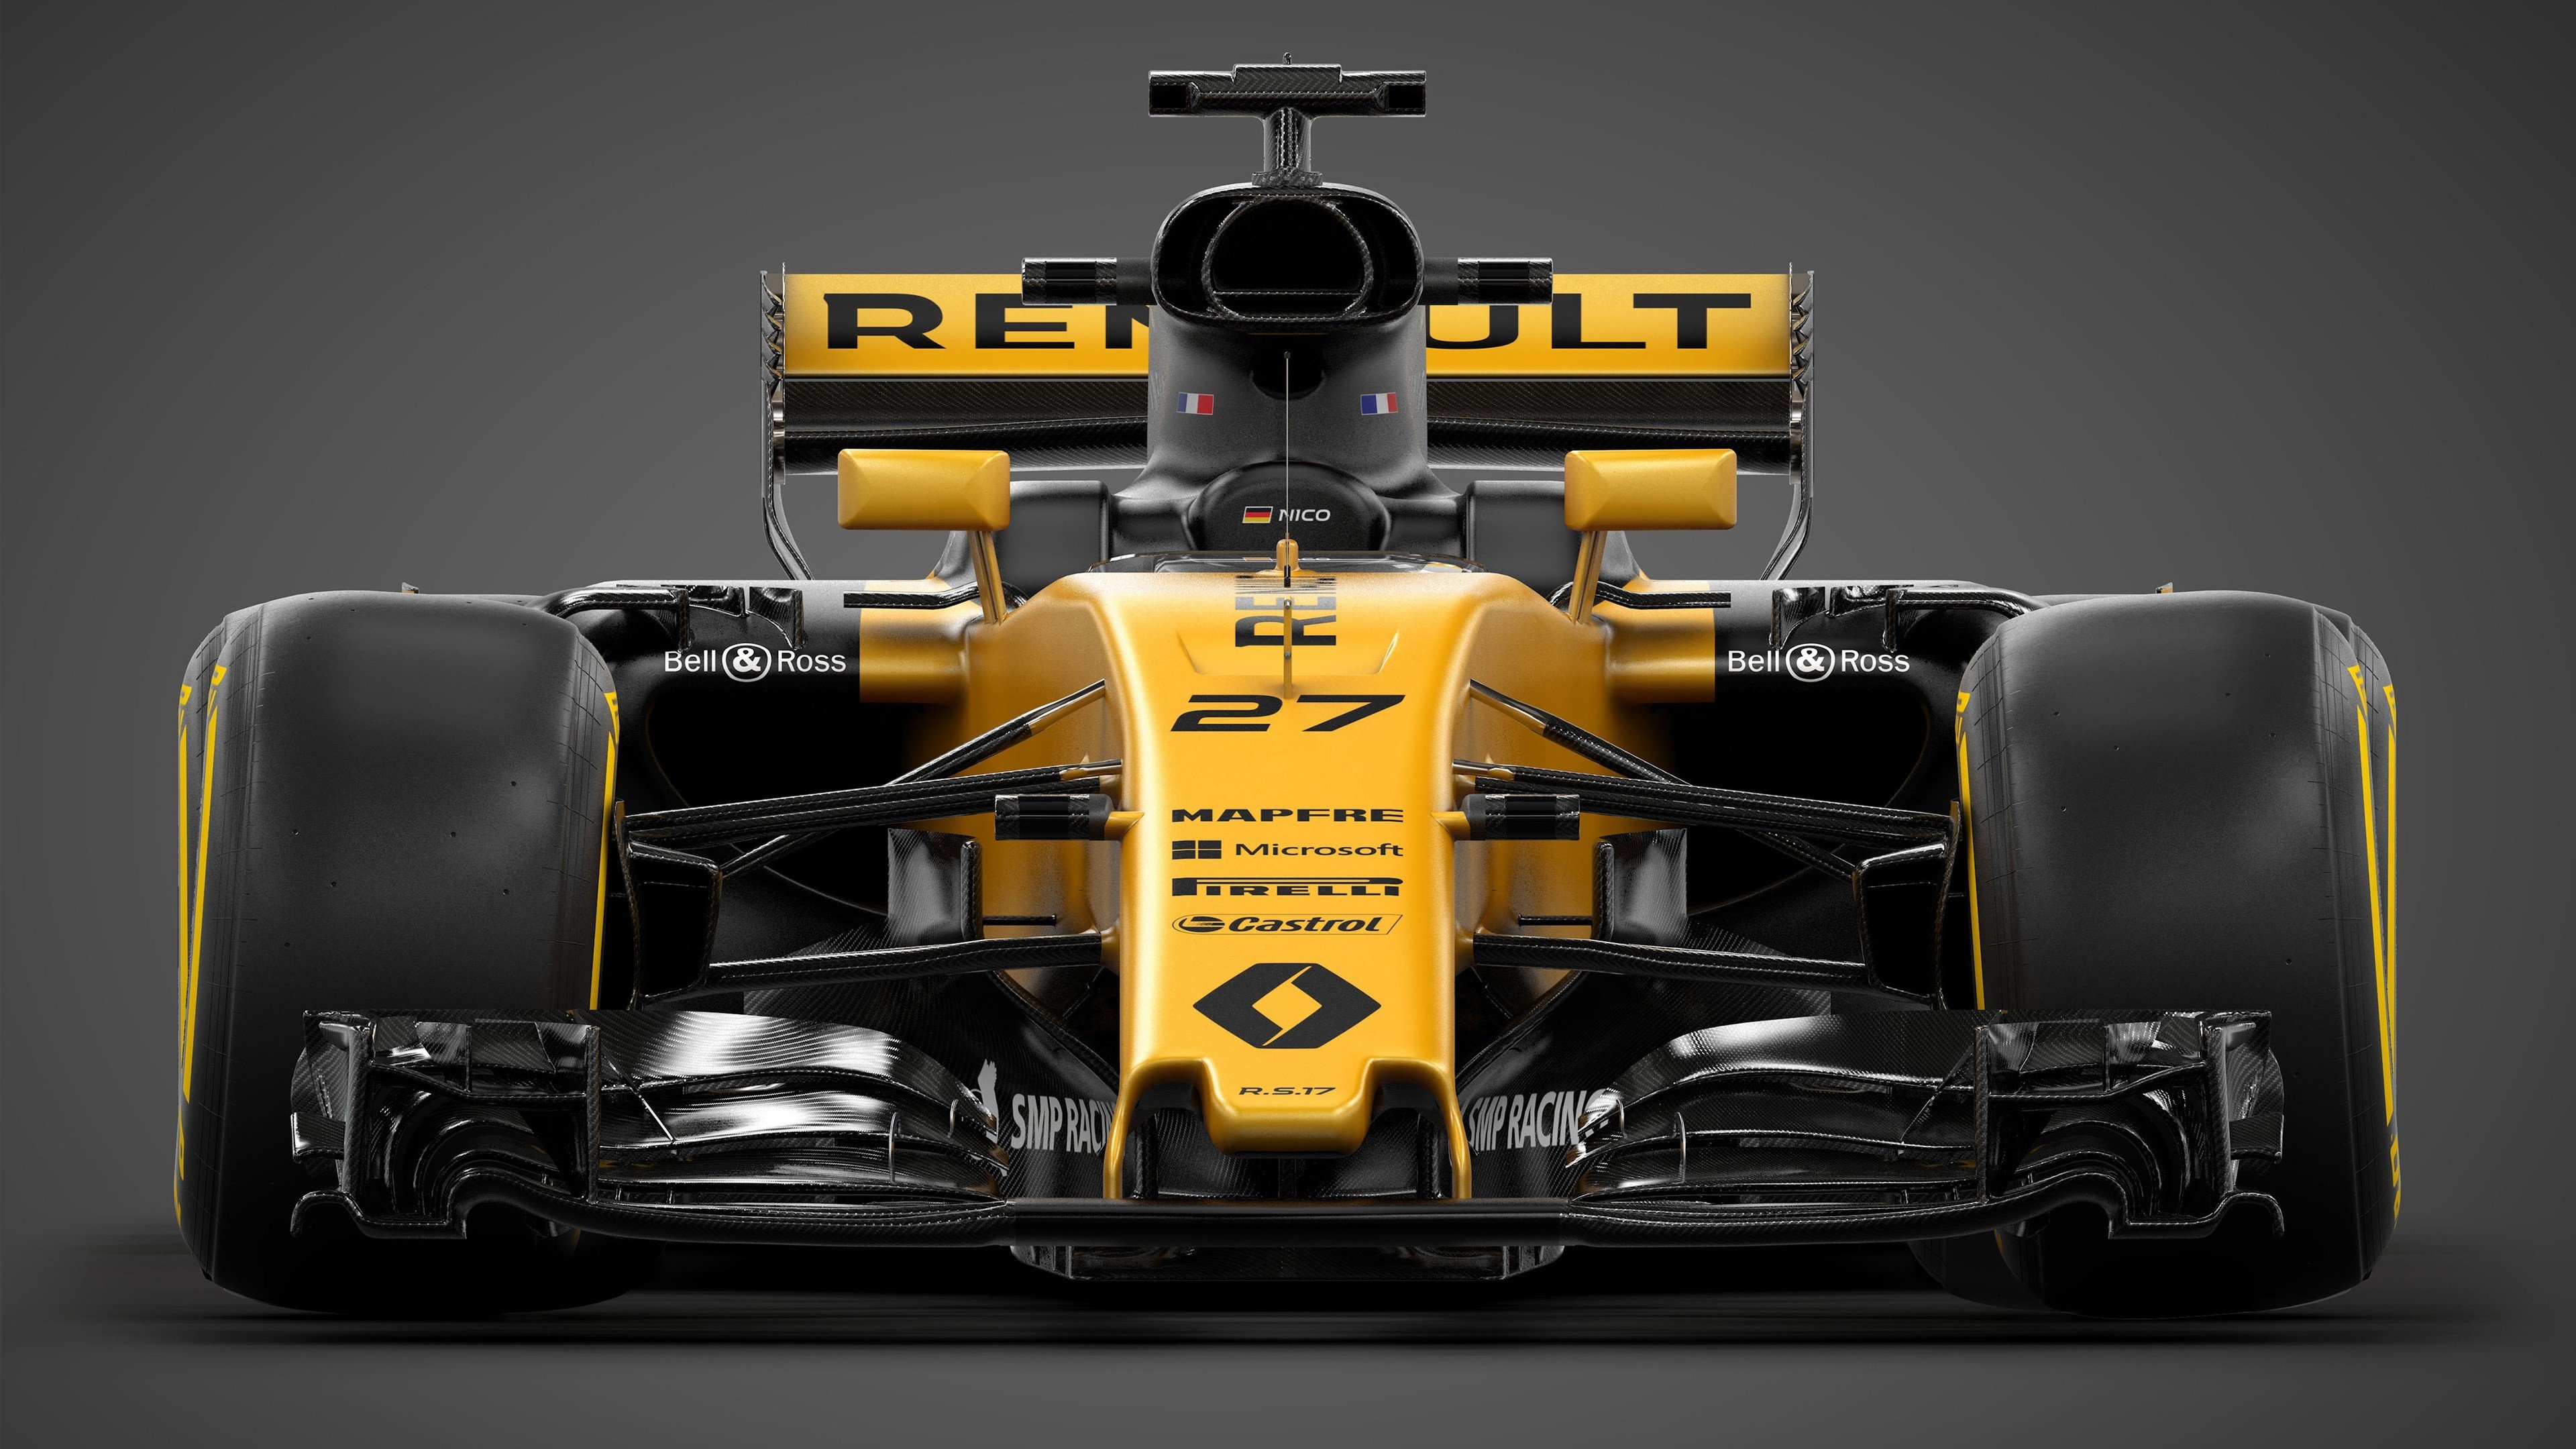 Formula 1: F1 car, A single-seat, open-cockpit, open-wheel racing car with substantial front and rear wings. 3840x2160 4K Background.